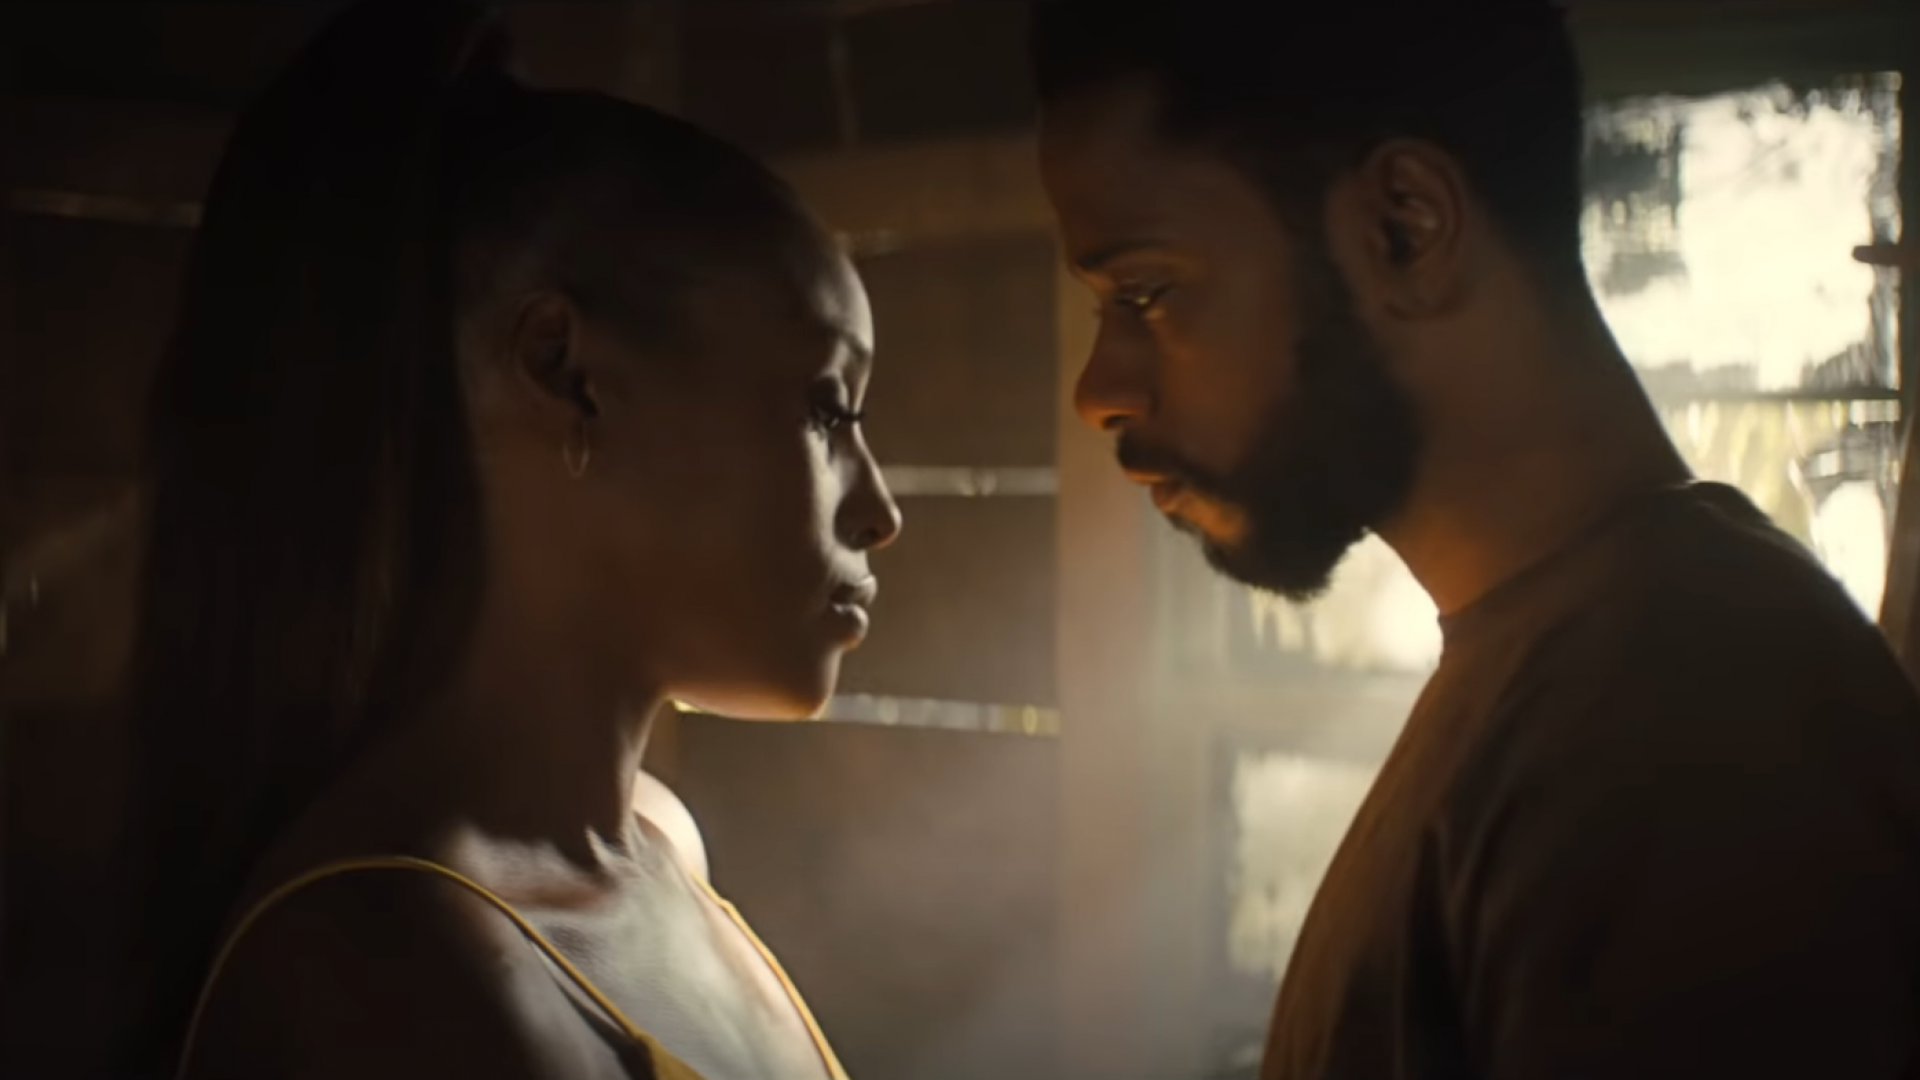 Love Blossoms Between Issa Rae And LaKeith Stanfield In New 'The Photograph' Trailer